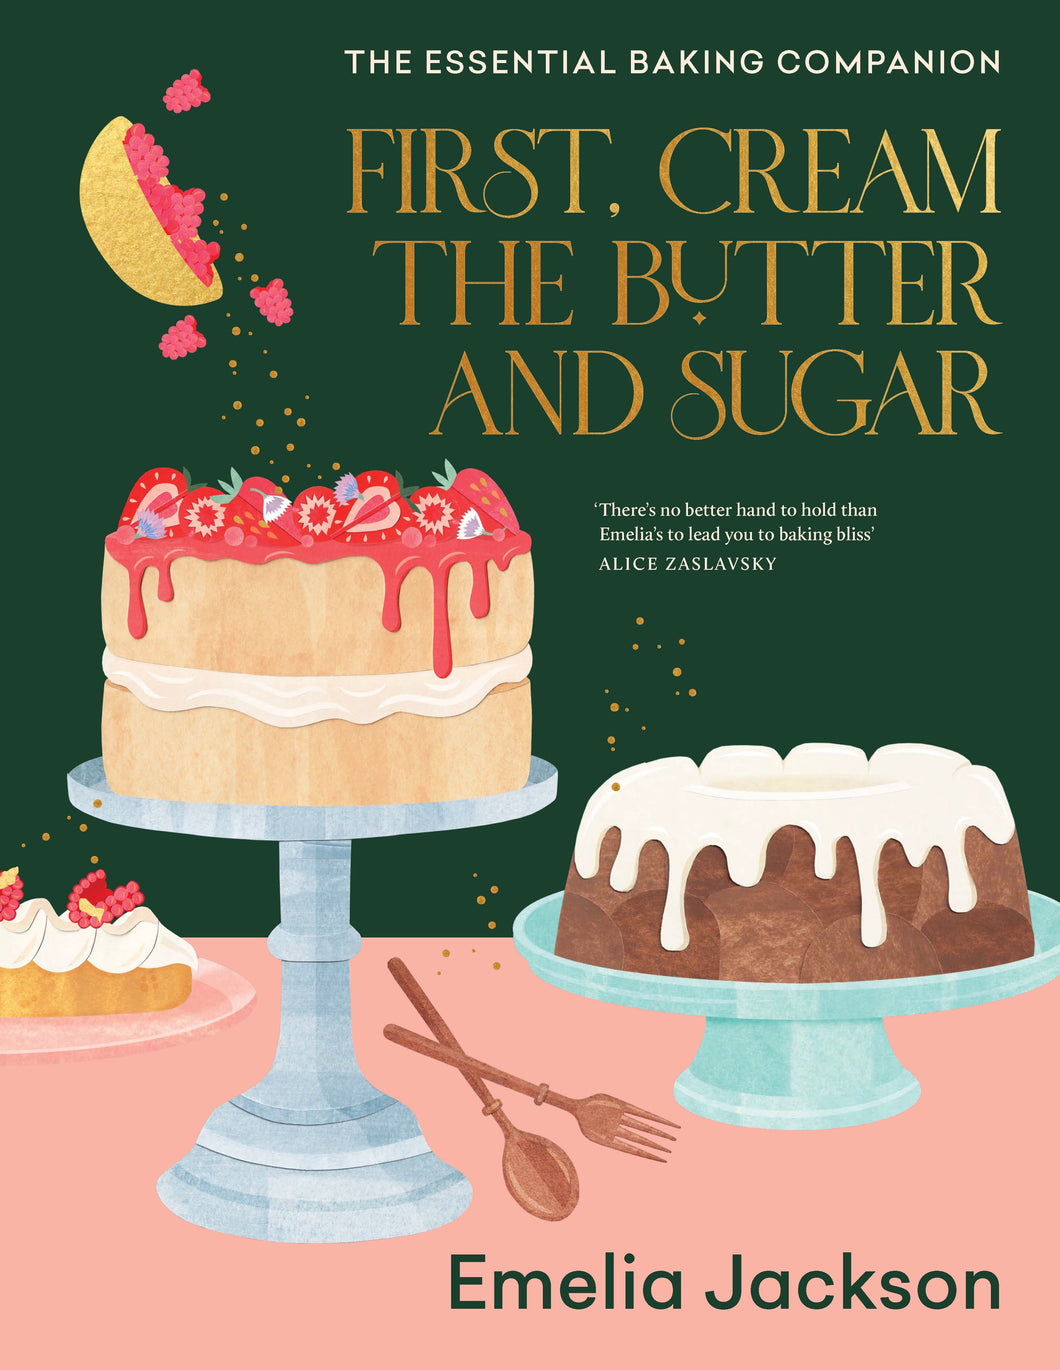 First, Cream the Butter and Sugar by Emelia Jackson